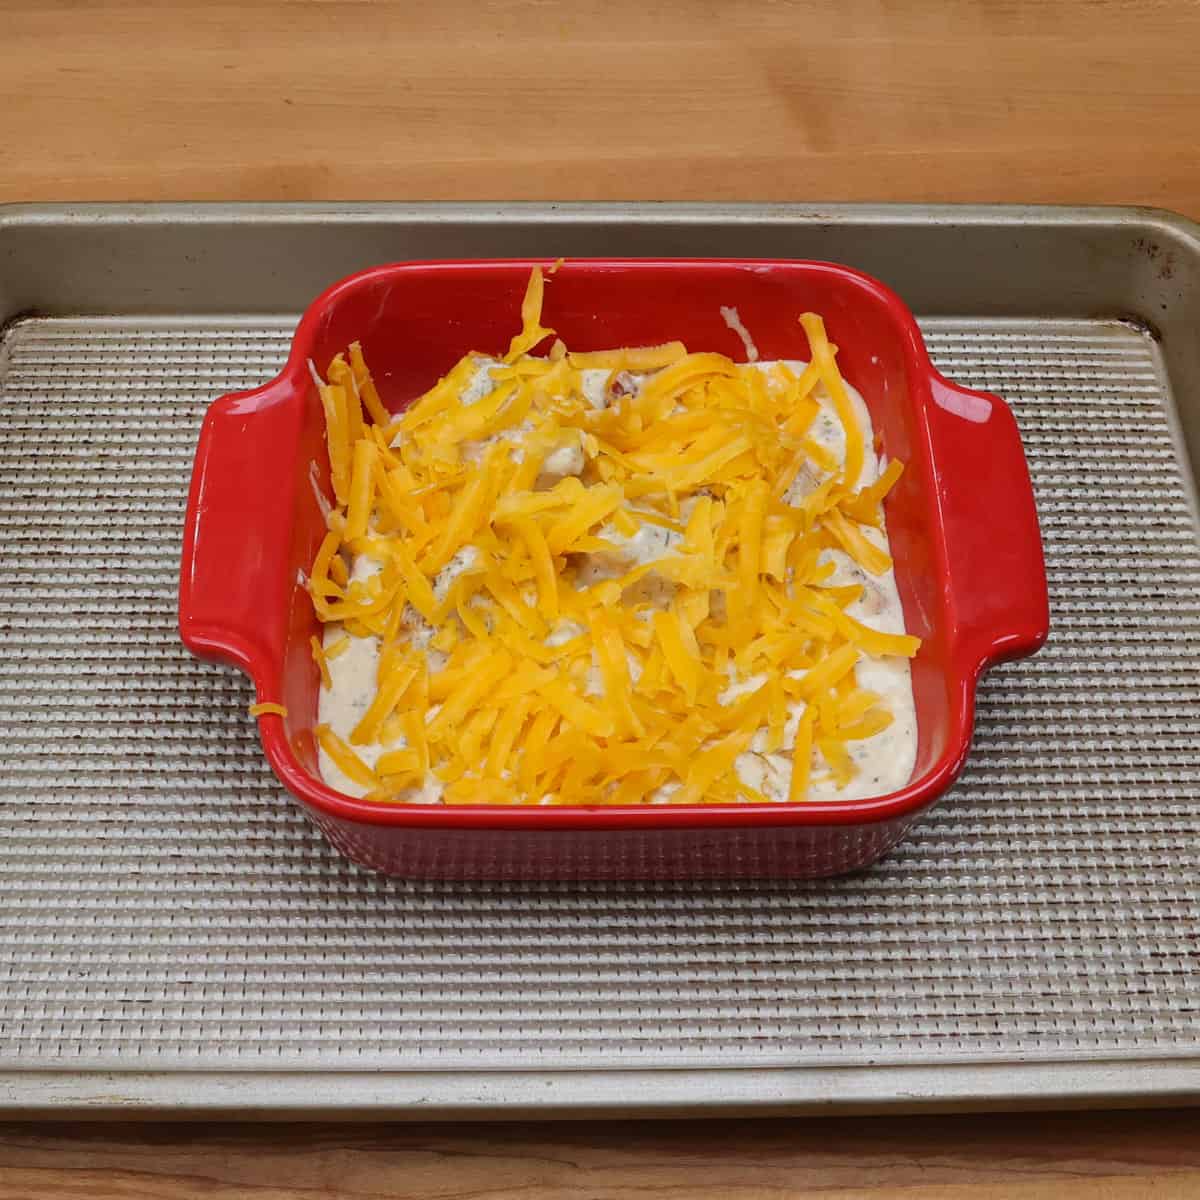 unbaked crack chicken topped with cheese on a rimmed baking sheet.